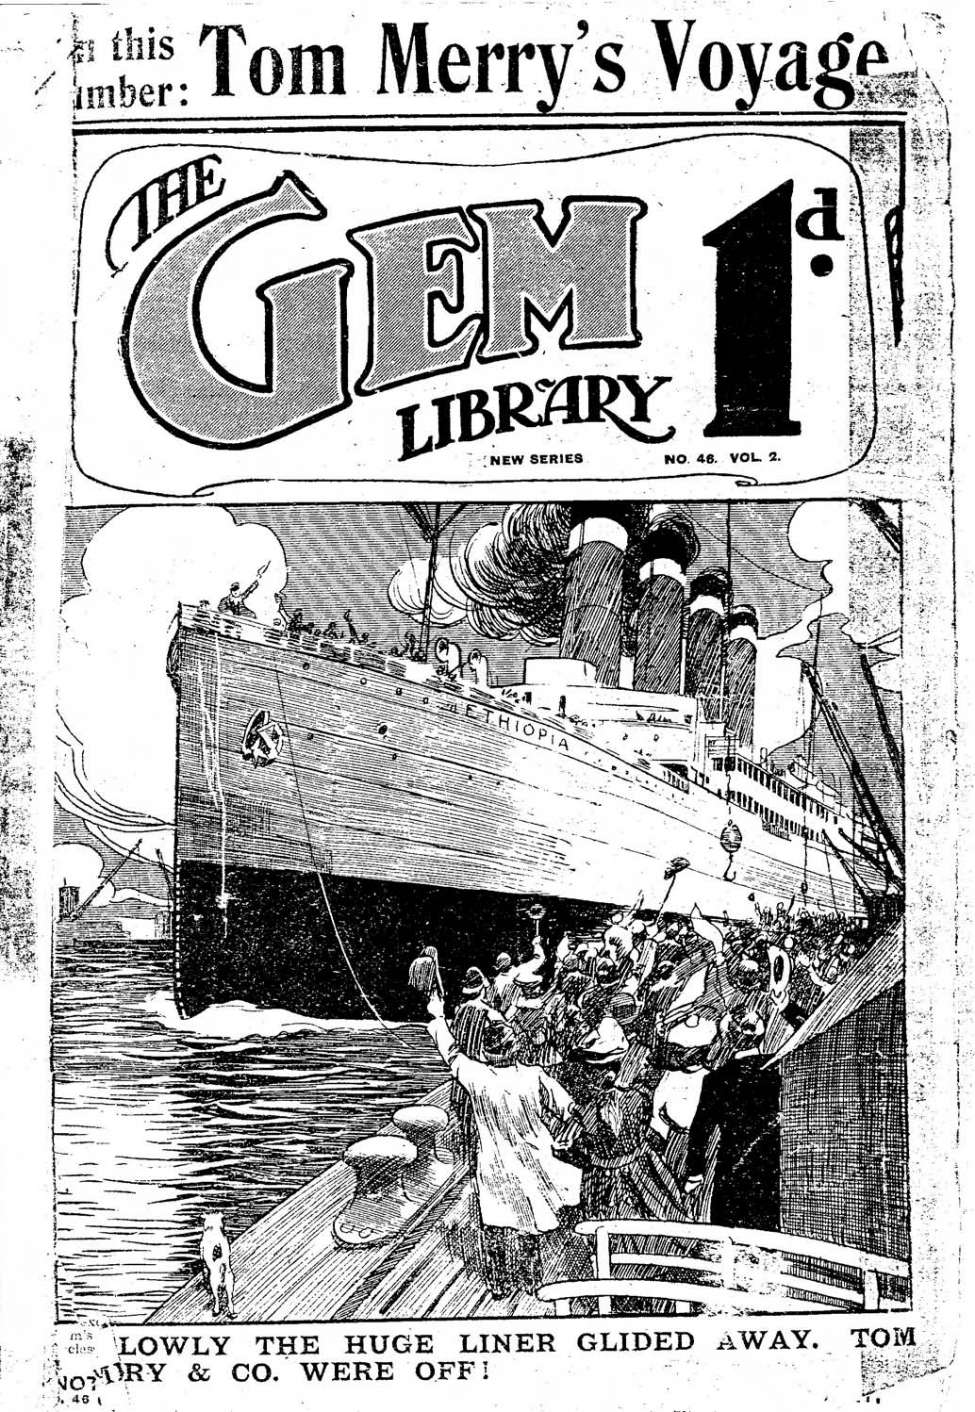 Comic Book Cover For The Gem v2 46 - Tom Merry’s Voyage